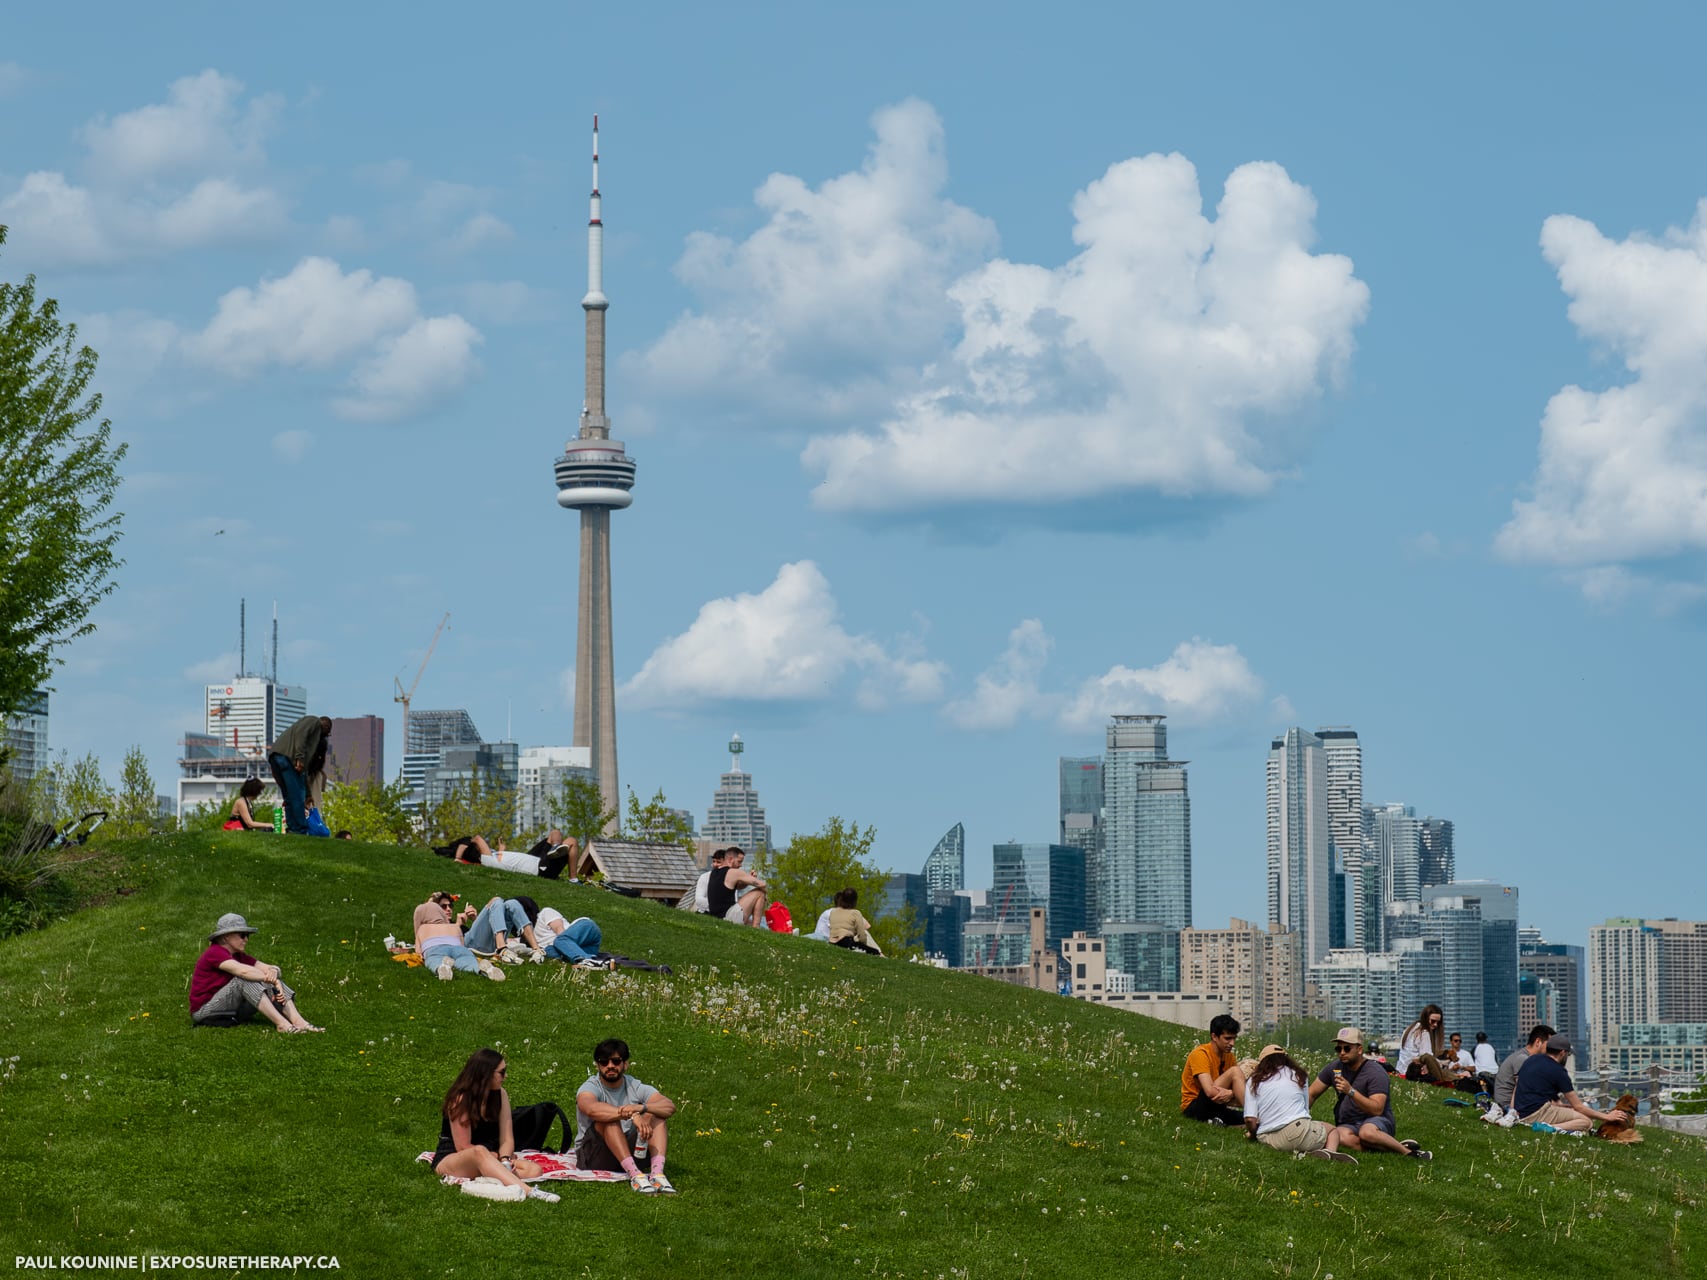 People relaxing on grass in Trillium park in Toronto on Sunny day with CN tower and downtown in background.